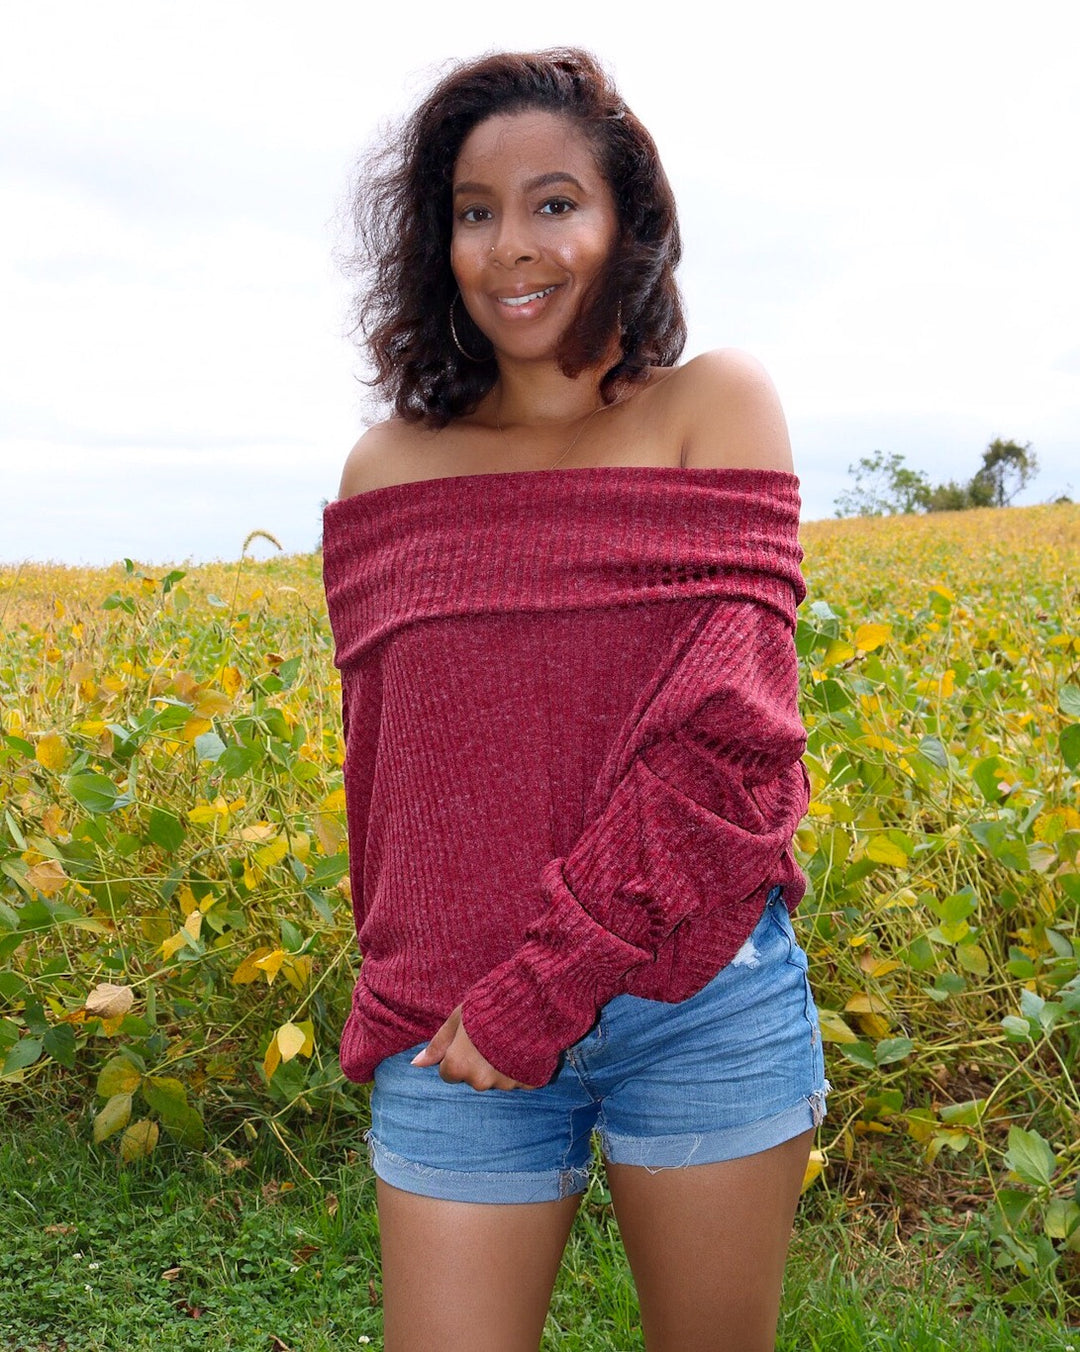 Looking For Attention Cowl Neck Sweater - Burgundy